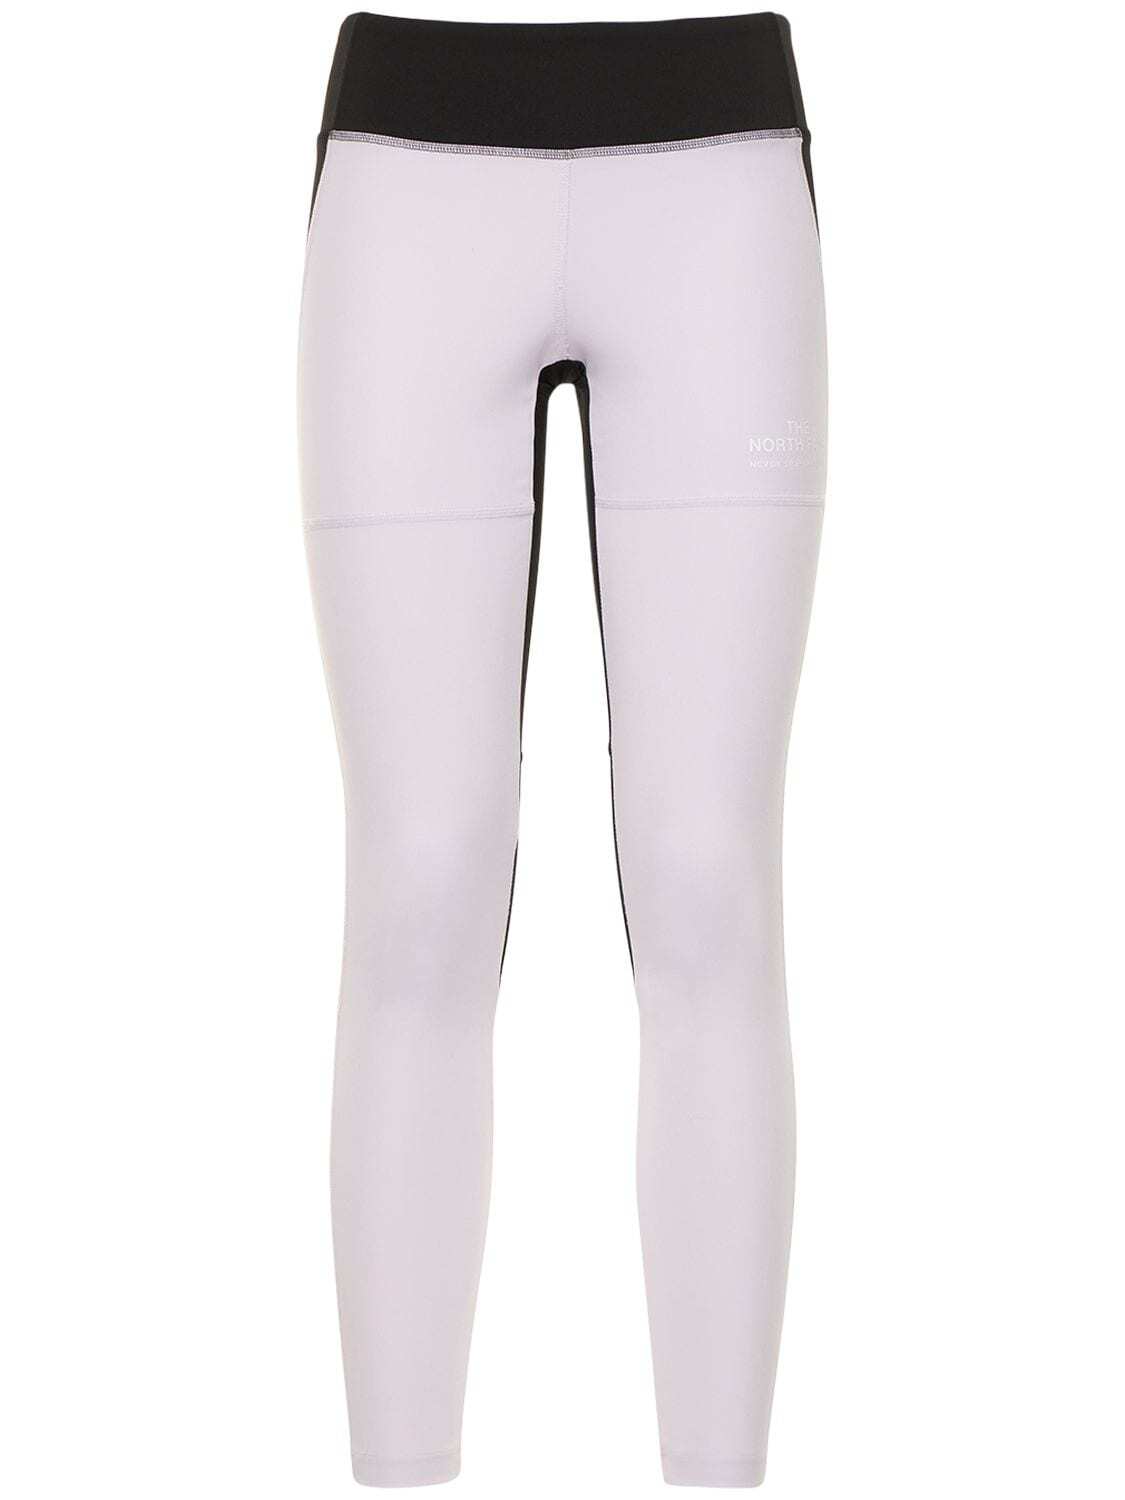 THE NORTH FACE Stretch Tech Leggings in violet